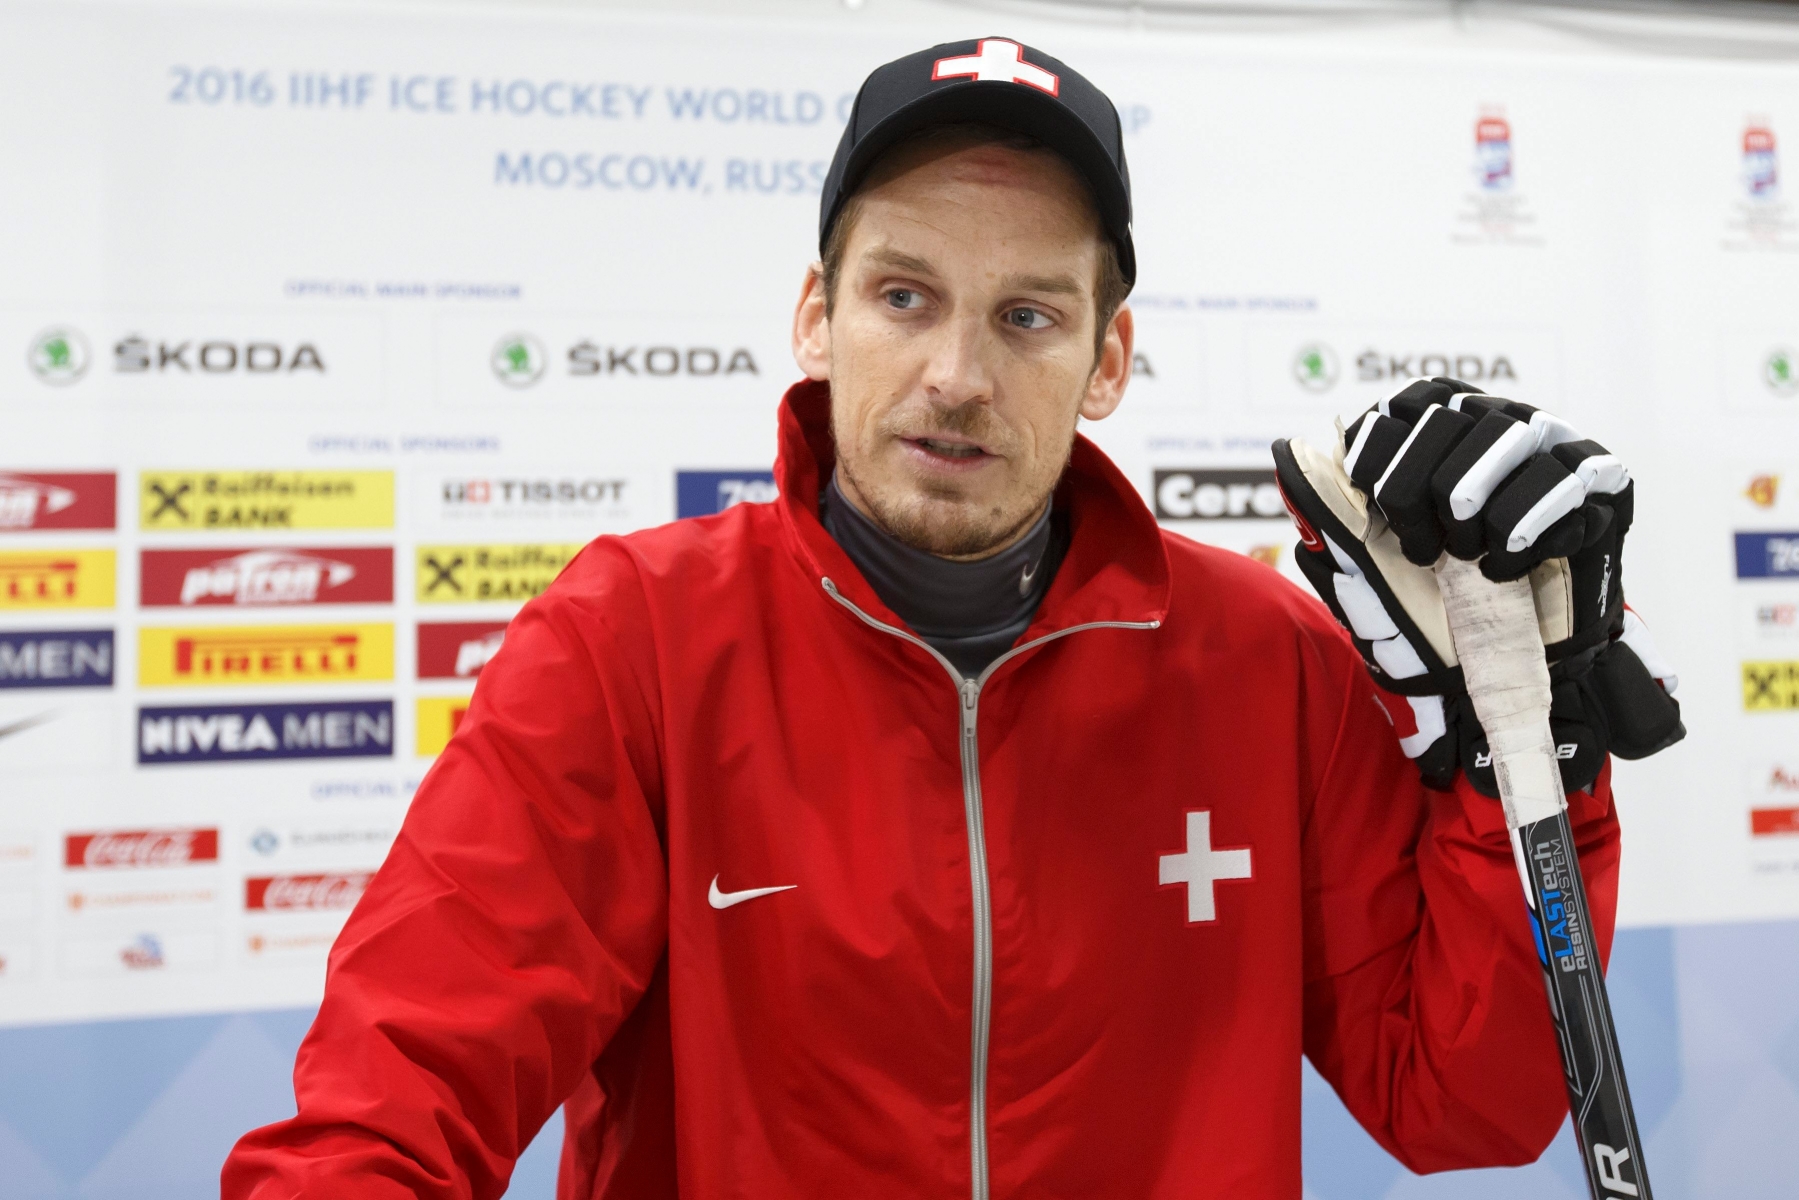 Patrick Fischer, head coach of Switzerland's national ice hockey team, speaks to the media, following a training session one day before the IIHF 2016 World Championship at the Ice Palace, in Moscow, Russia, Thursday, May 5, 2016. (KEYSTONE/Salvatore Di Nolfi) RUSSIA ICE HOCKEY IIHF WC 2016 TEAM SWITZERLAND TRAINING